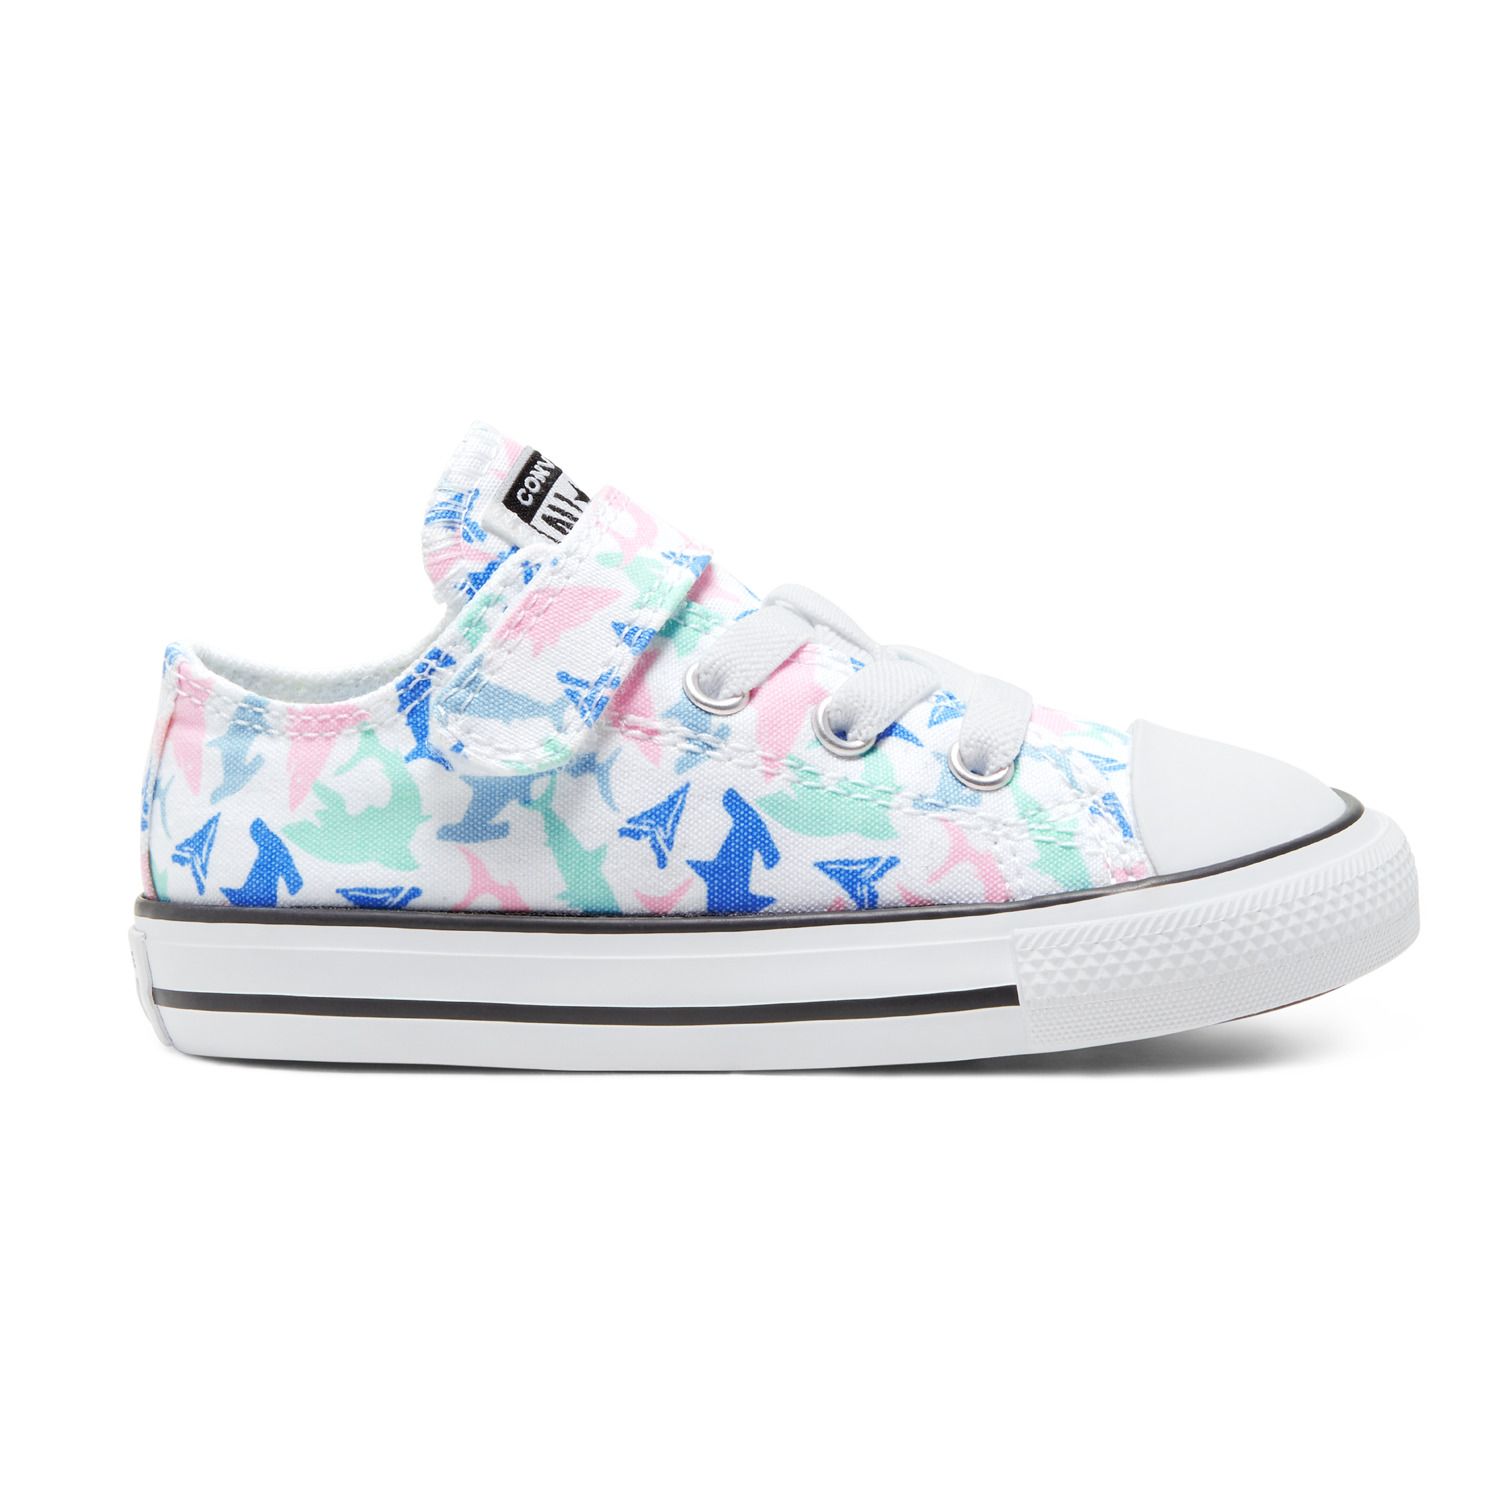 converse sneaker shoes for girls